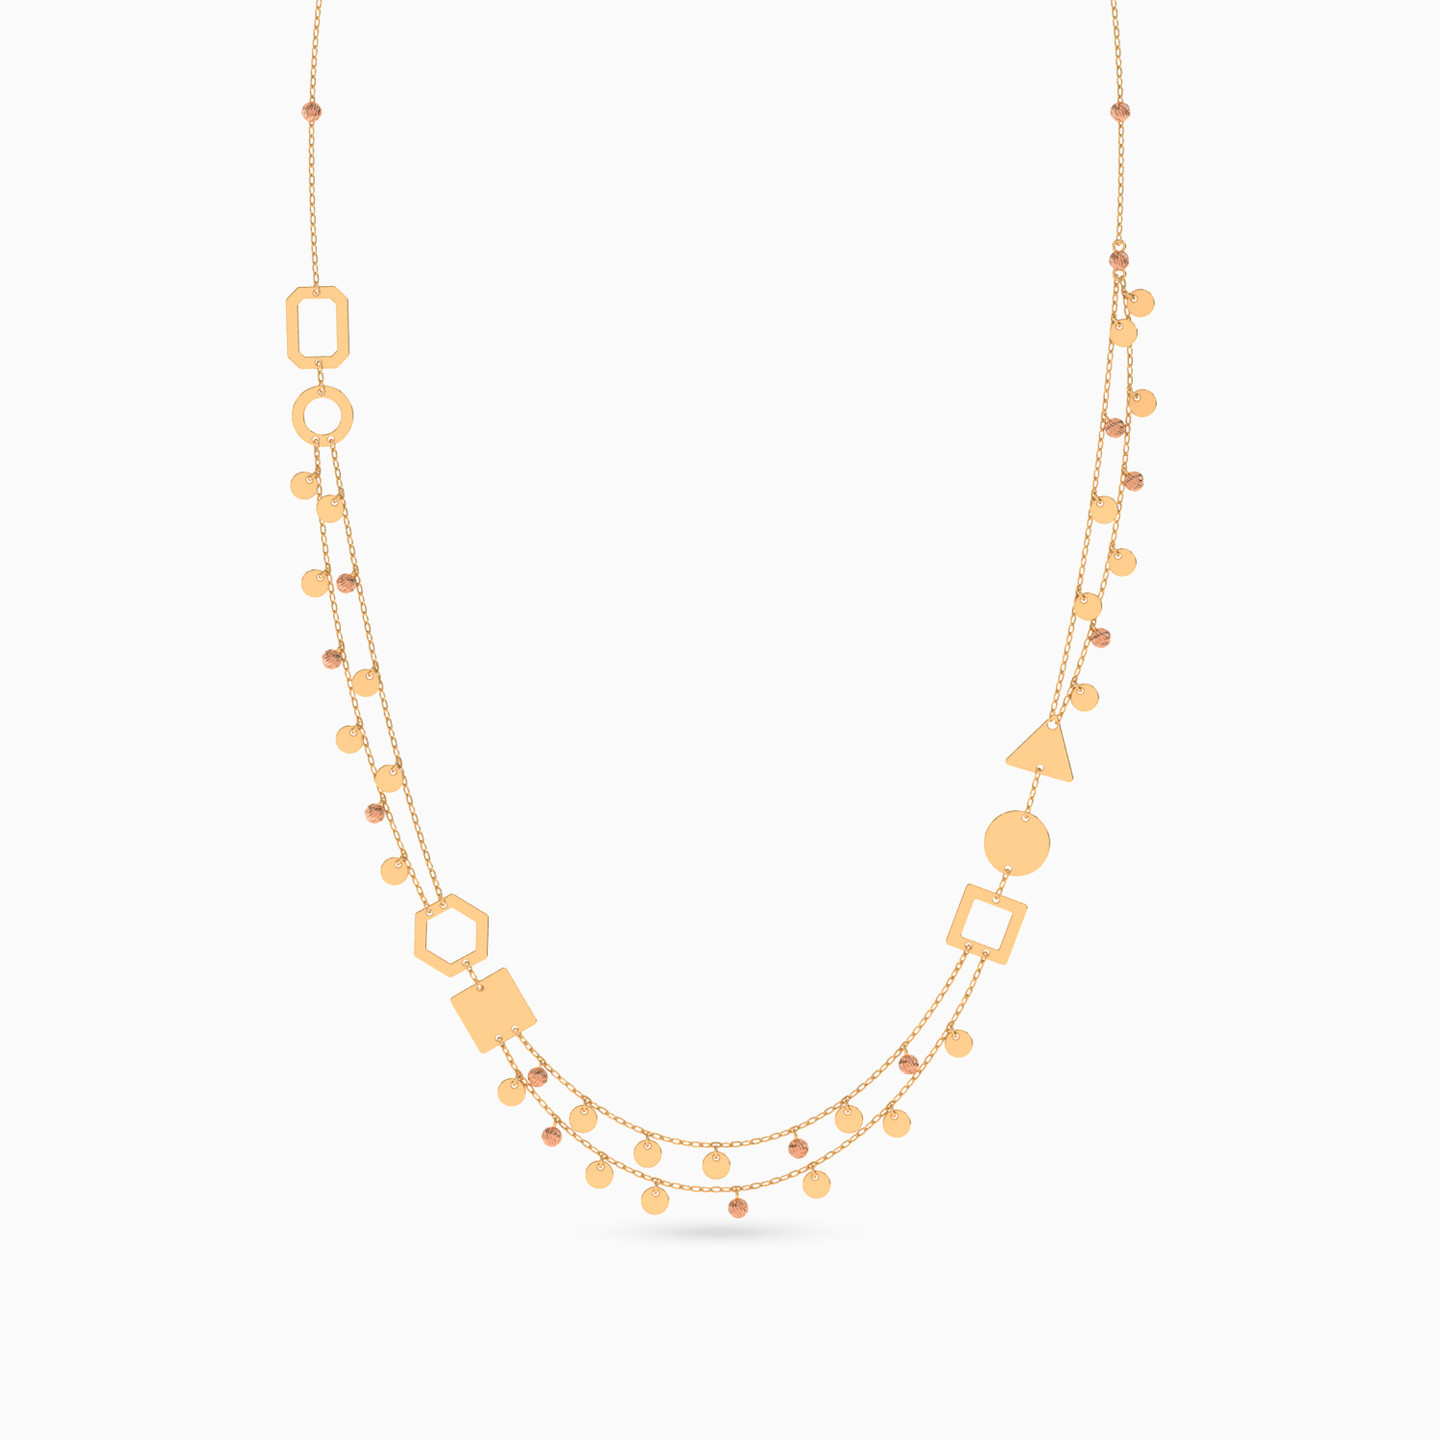 21K Gold Layered Necklace - 3